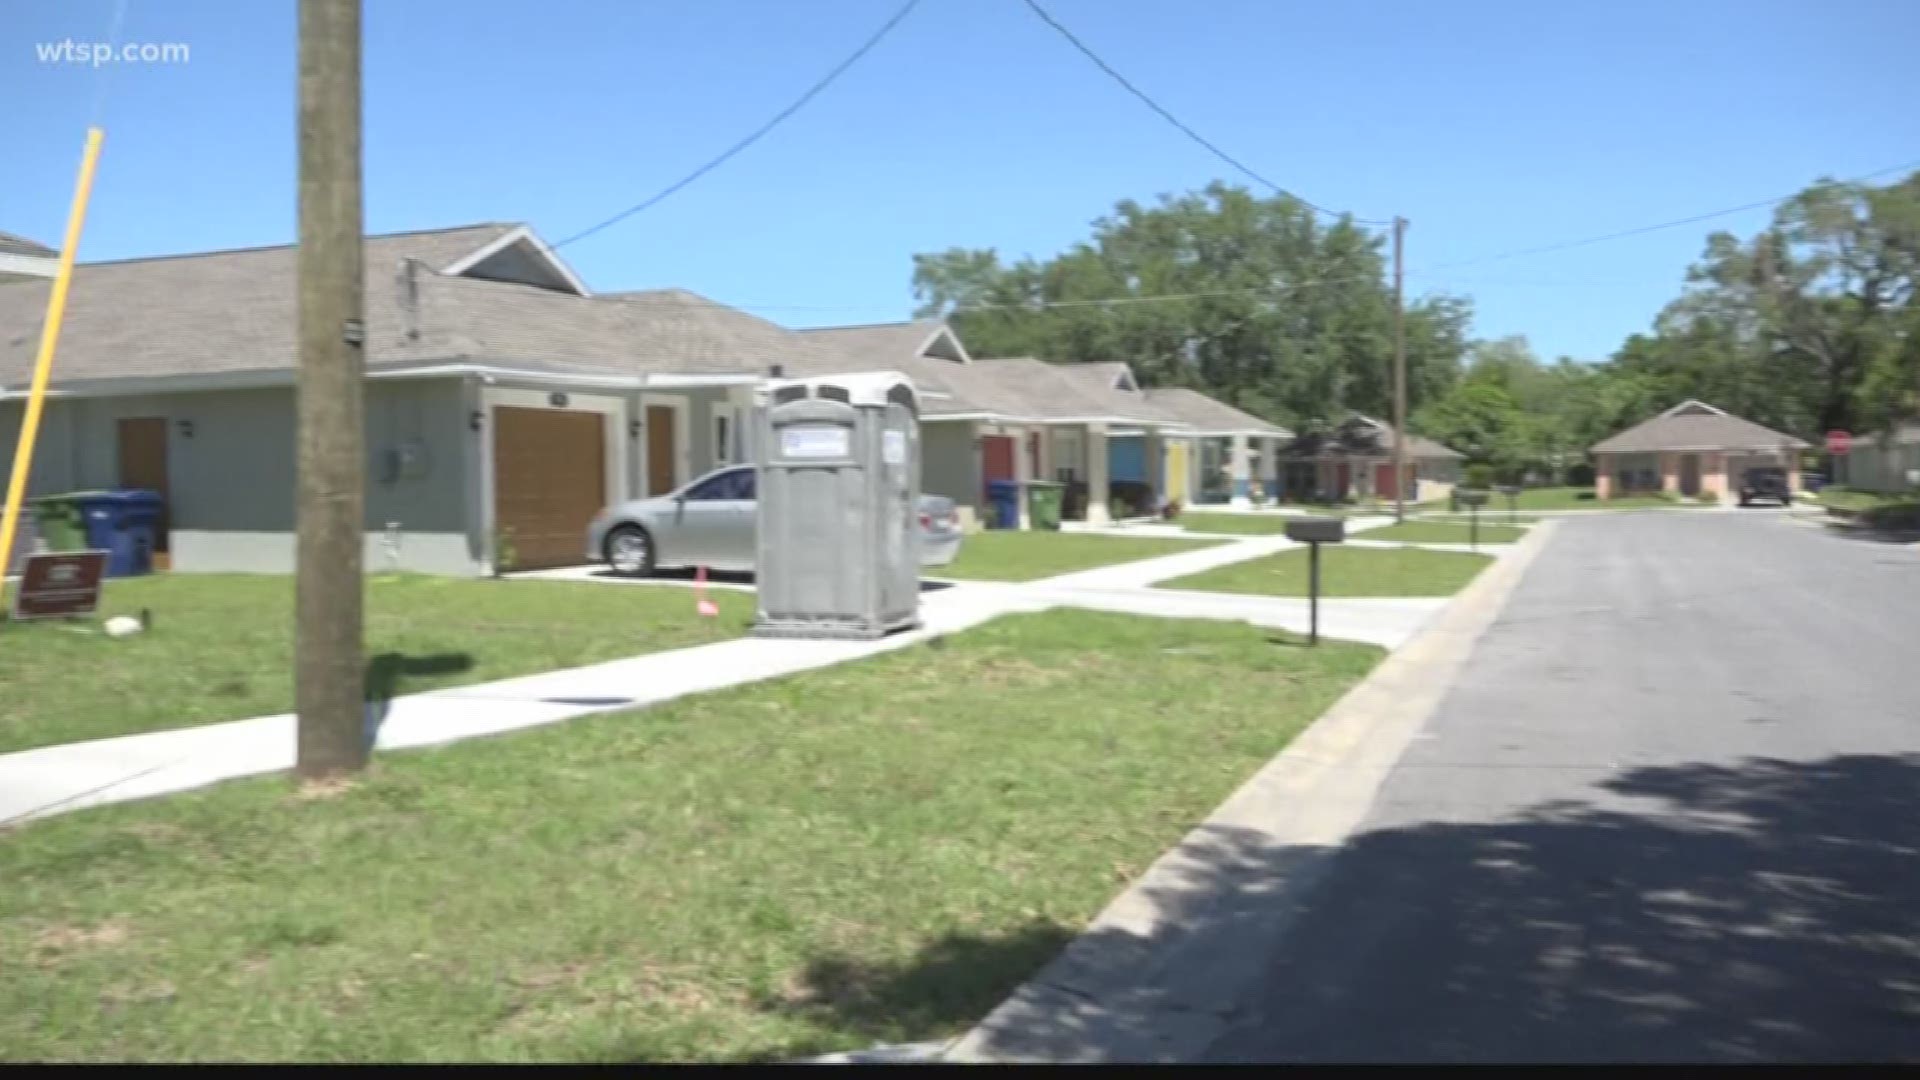 There are several initiatives around Tampa Bay to make housing more affordable. https://on.wtsp.com/2UIbMo0